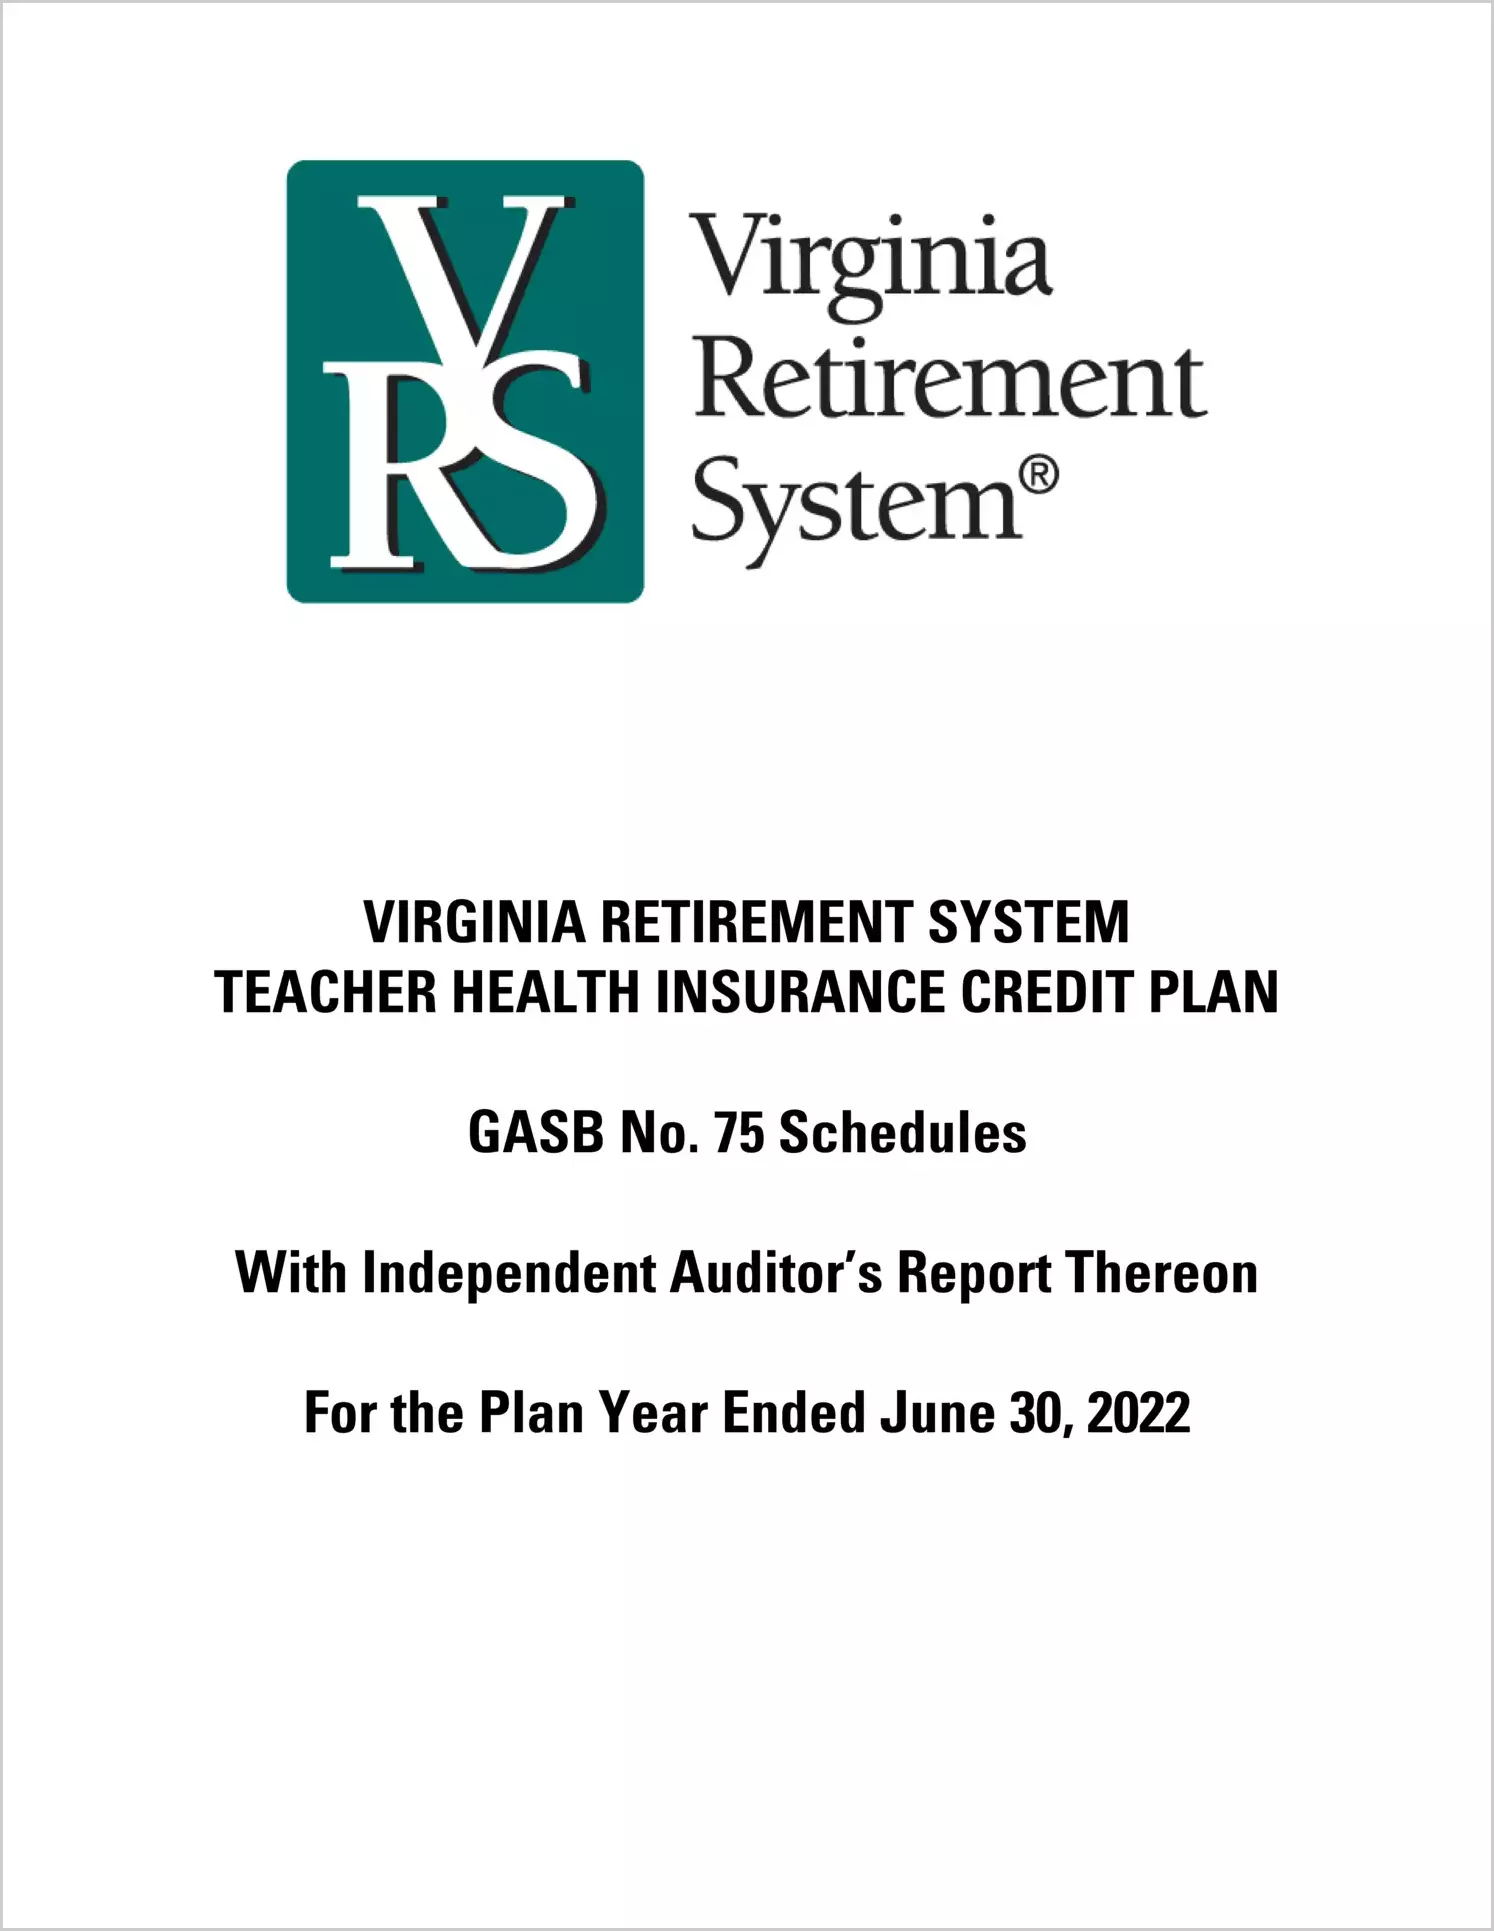 GASB 75 Schedules - Virginia Retirement System Teacher Health Insurance Credit Plan for the year ended June 30, 2022